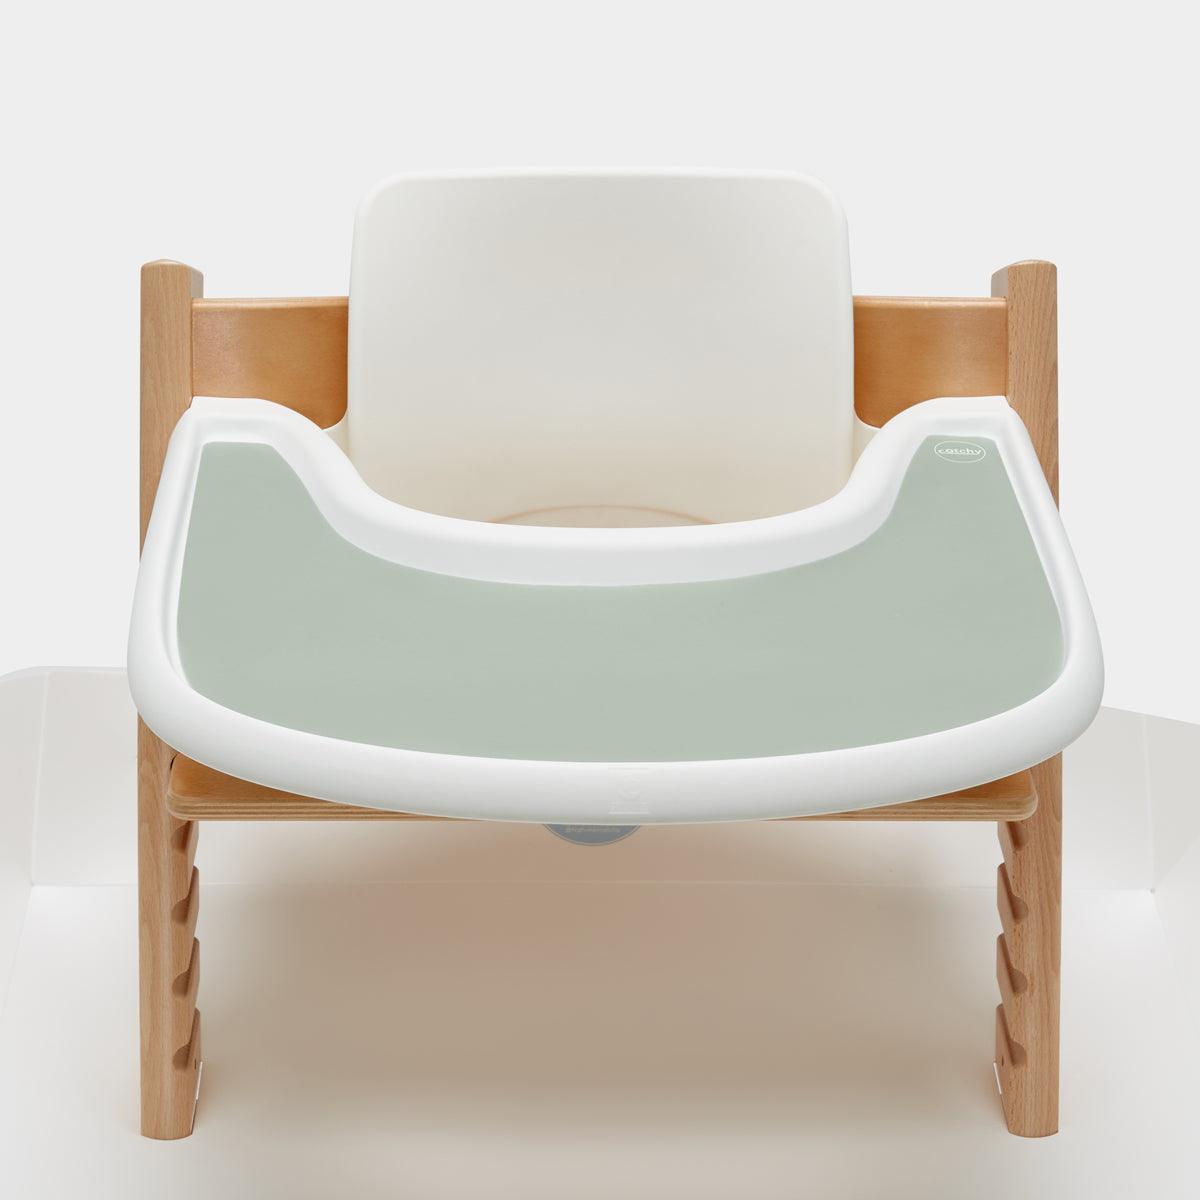 Food Catcher Accessory for Stokke Tripp Trapp Highchairs - Baby & Toddler  Mess Mat